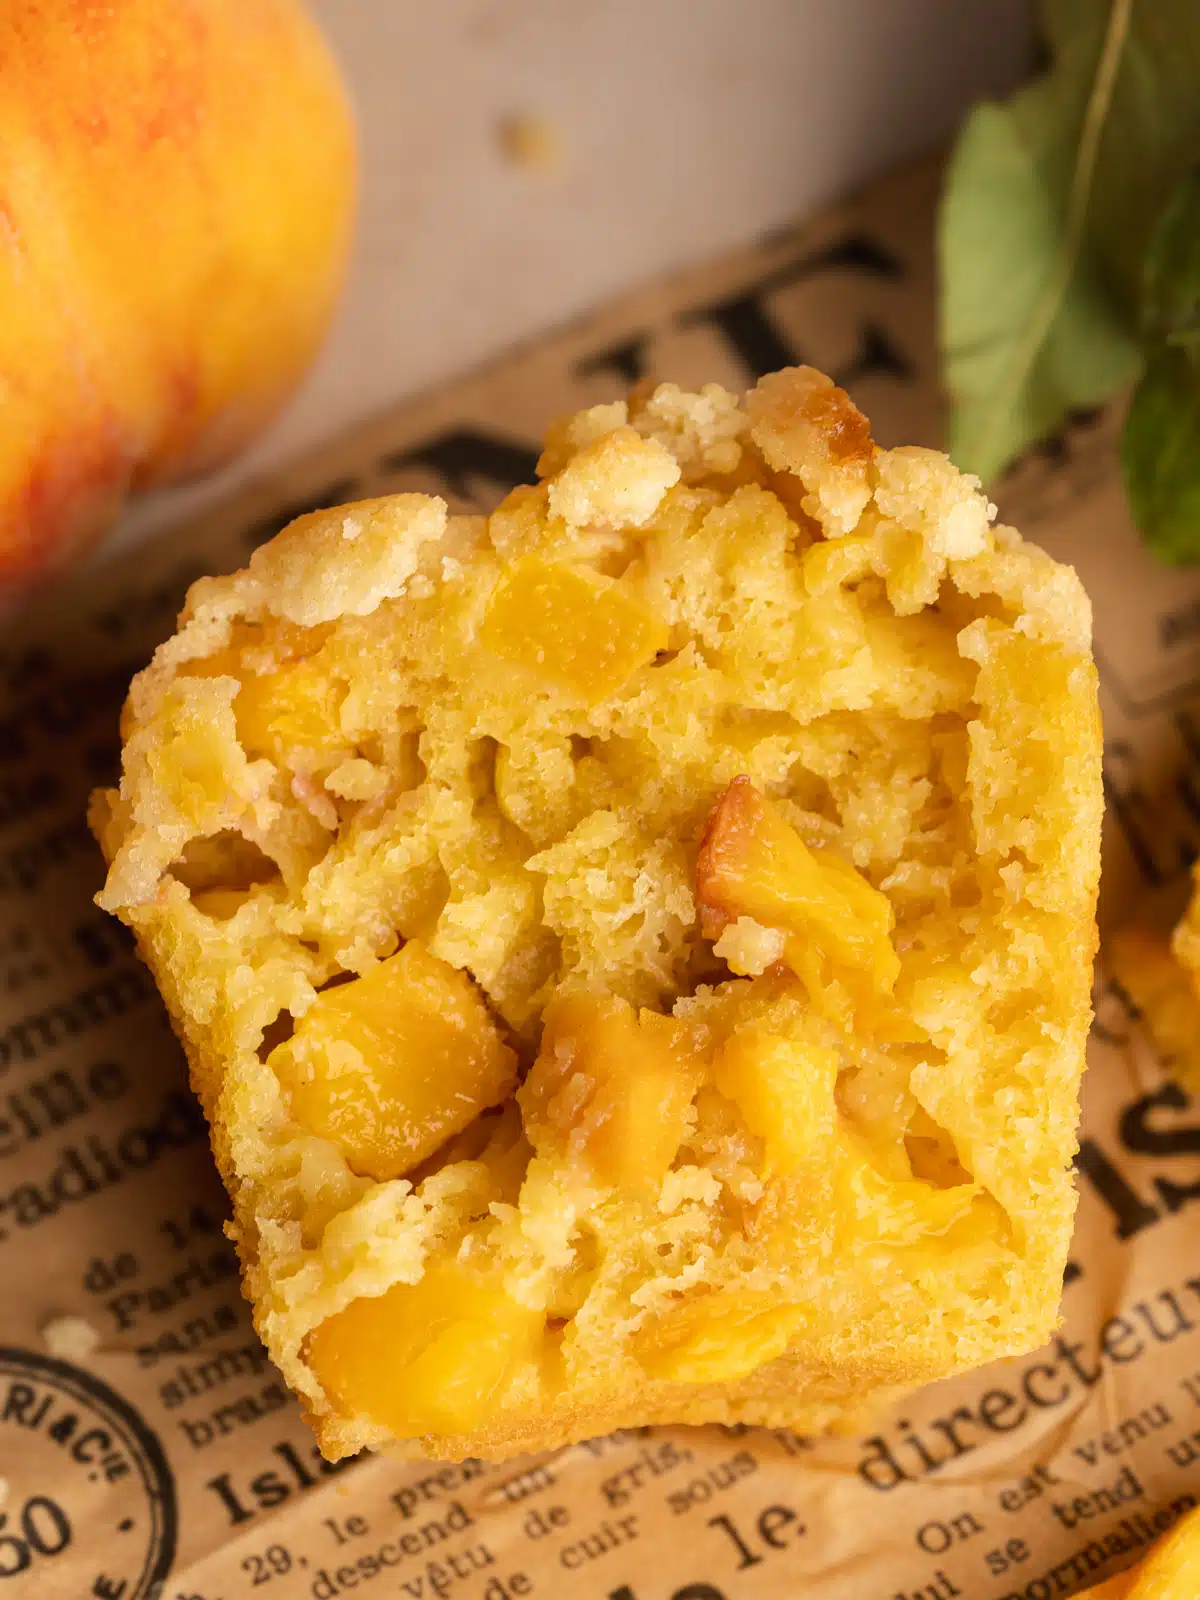 a peach muffin that's been sliced in half showing the fluffy interior studded with fresh peach chunks.